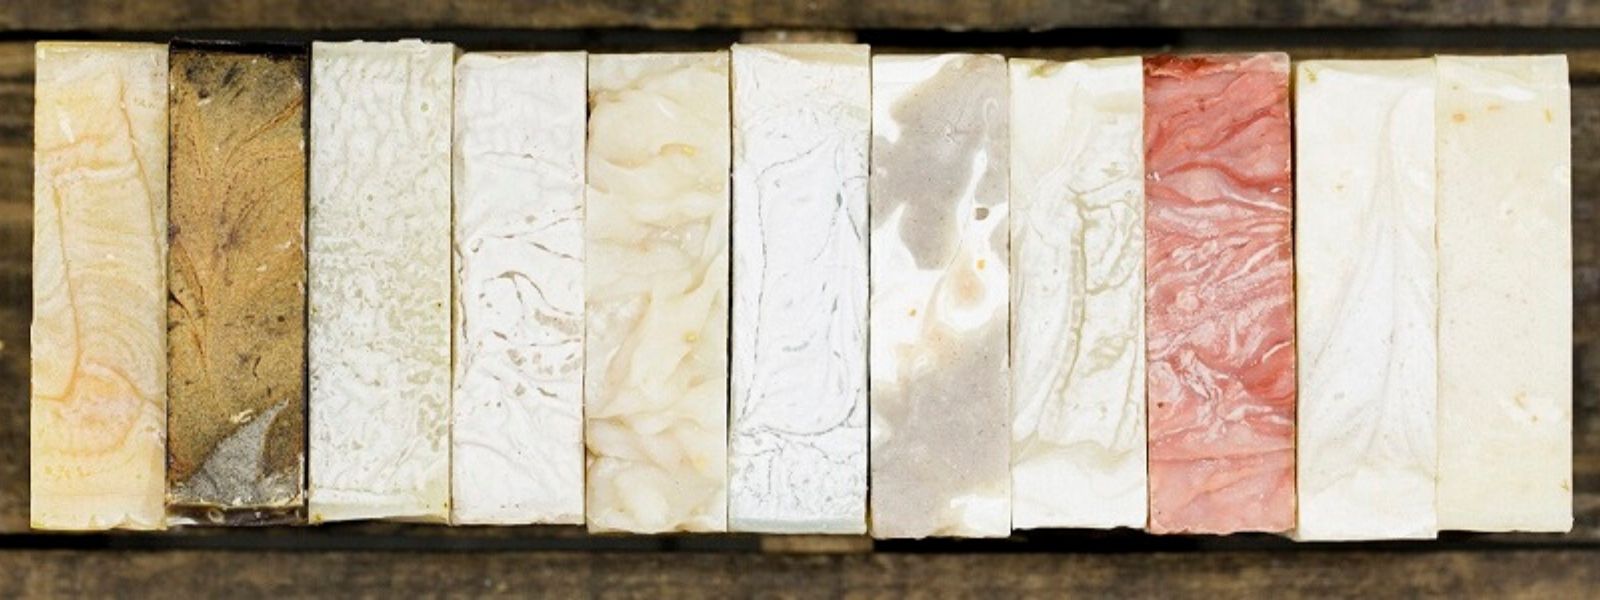 moxxie handcrafted botanical bar soap